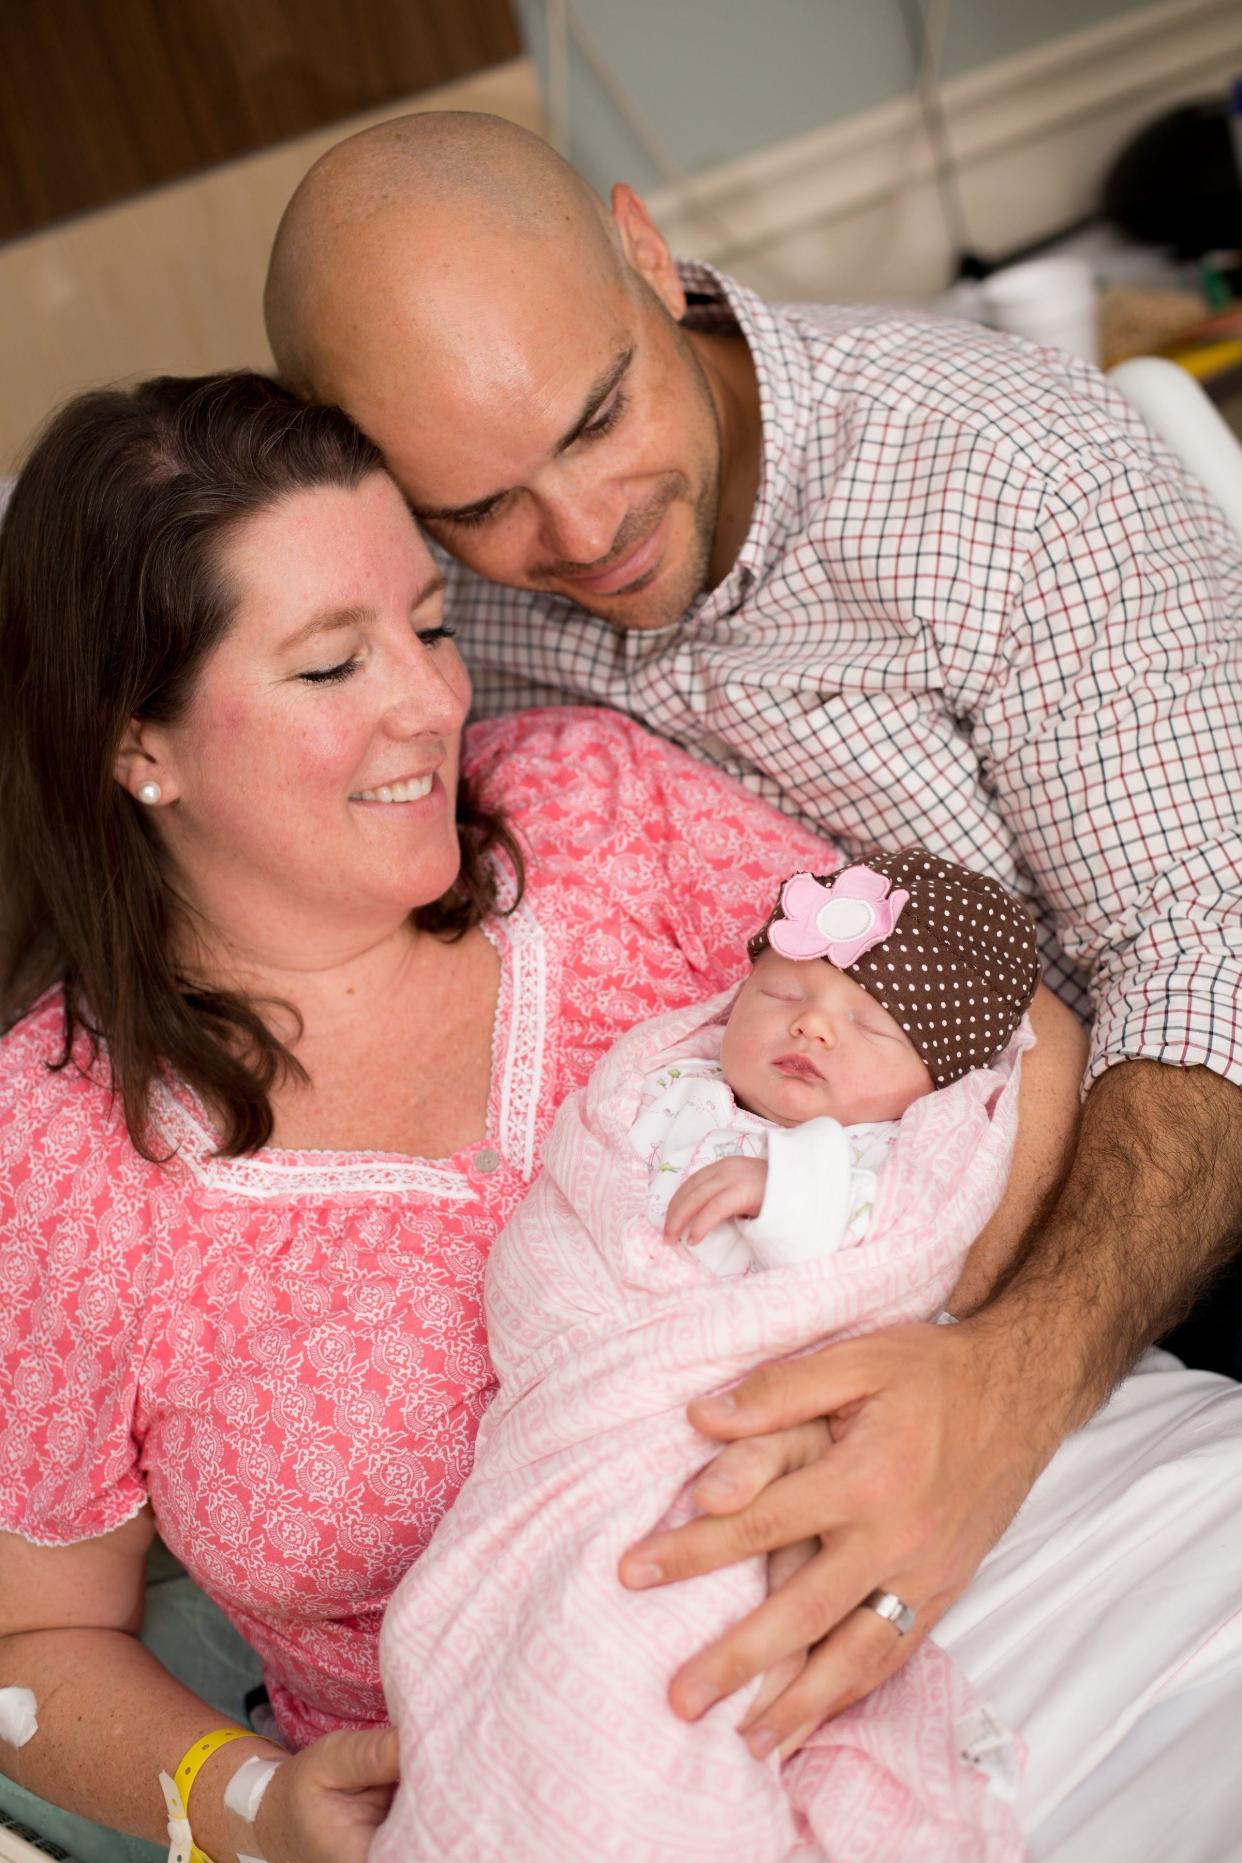 Kristin Dillensnyder and her husband in 2017, with their daughter, Grace, who was born via IVF.